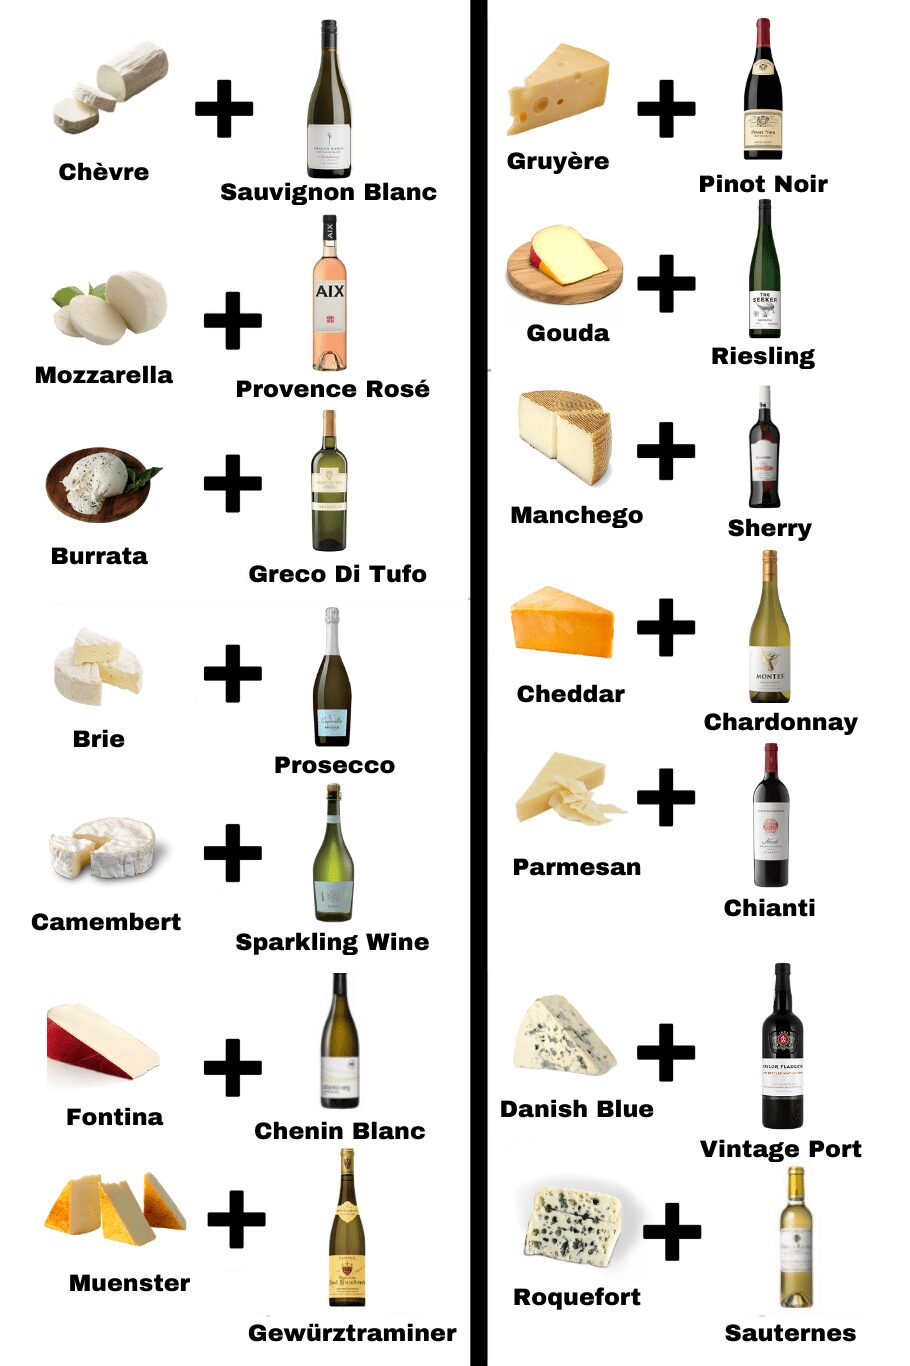 And Food Pairing Chart